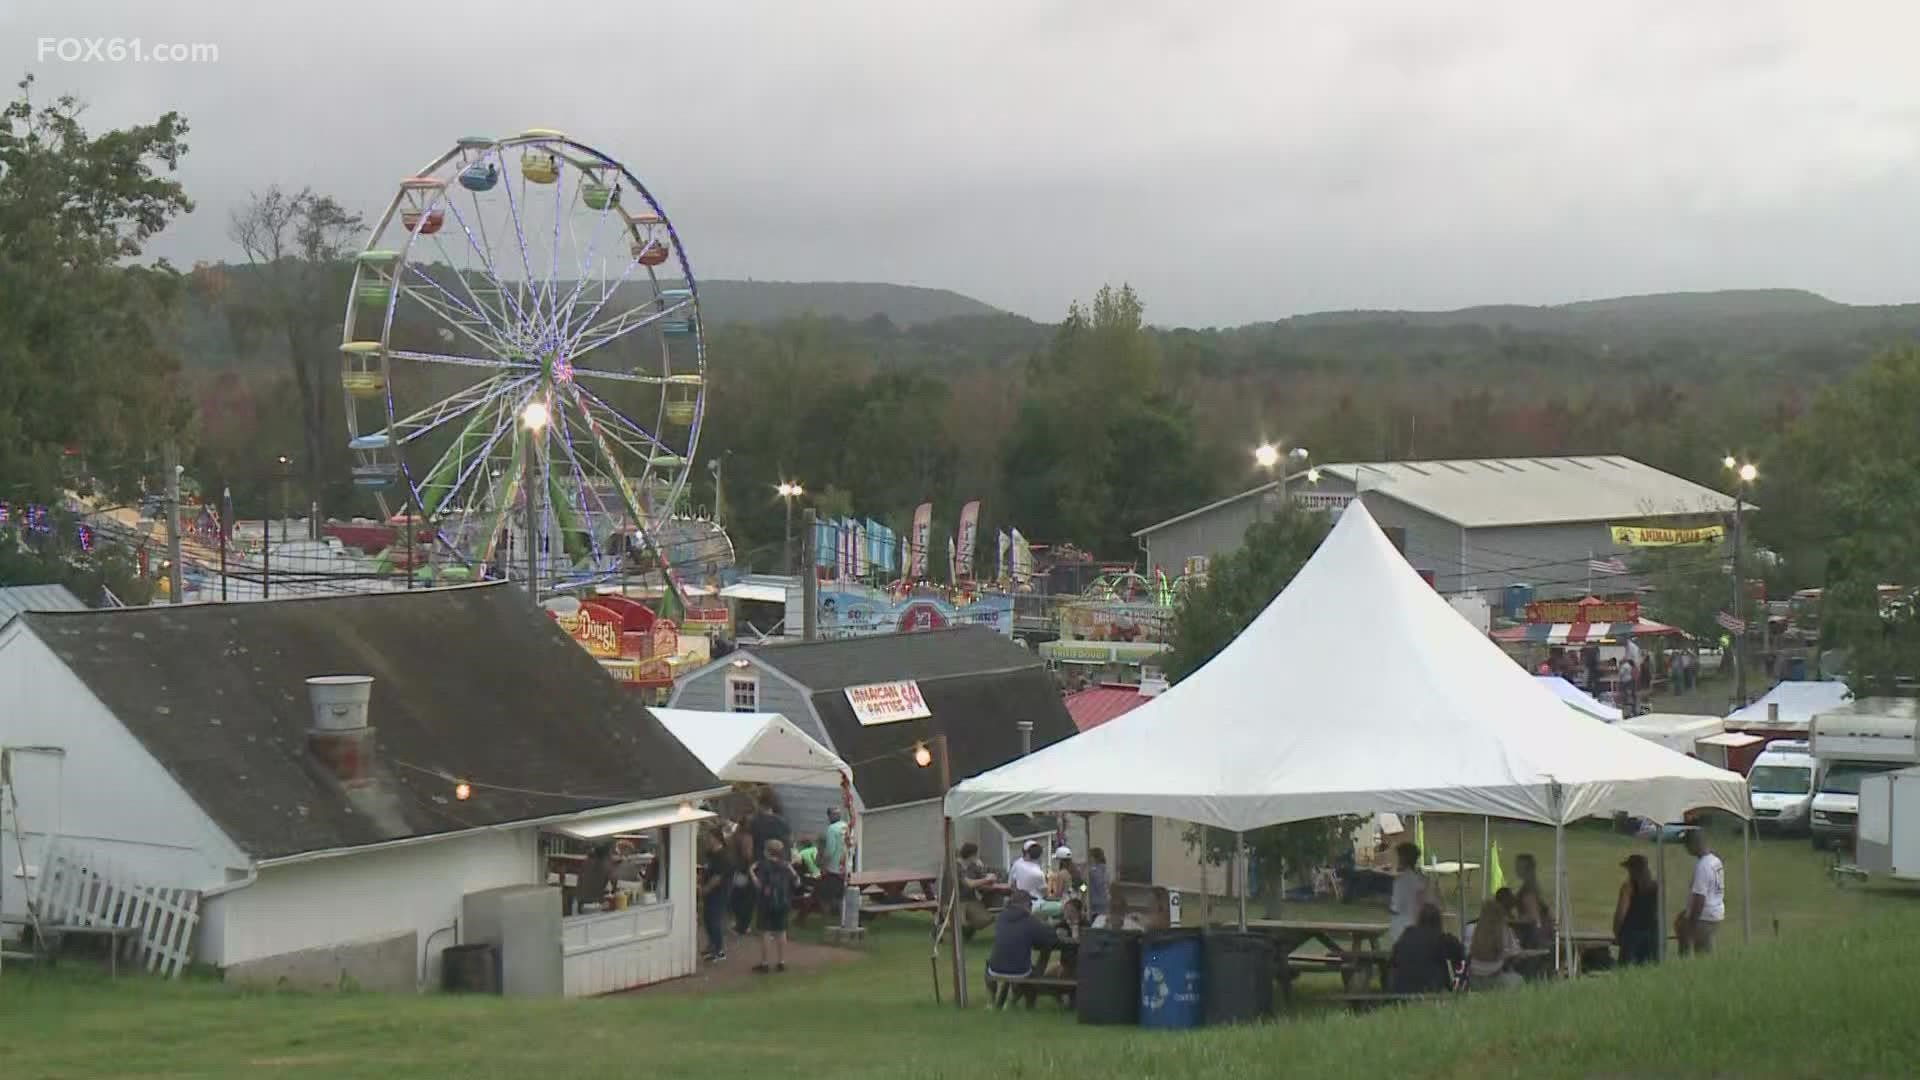 After its pandemic hiatus, Connecticut's largest agricultural fair is back for 2021!